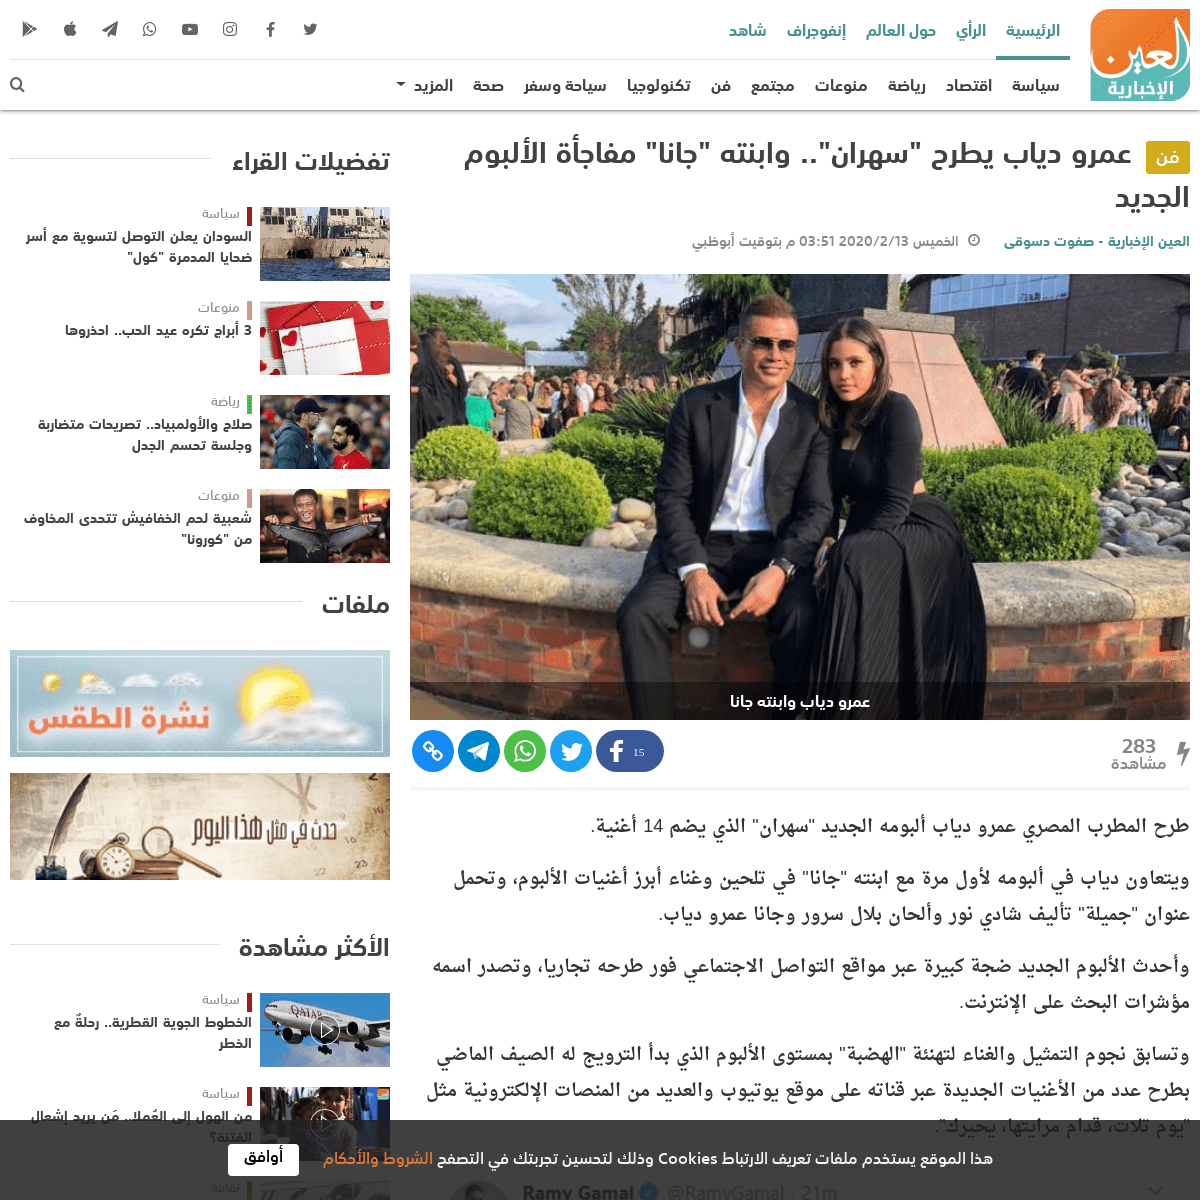 A complete backup of al-ain.com/article/amr-diab-releprise-of-the-new-album